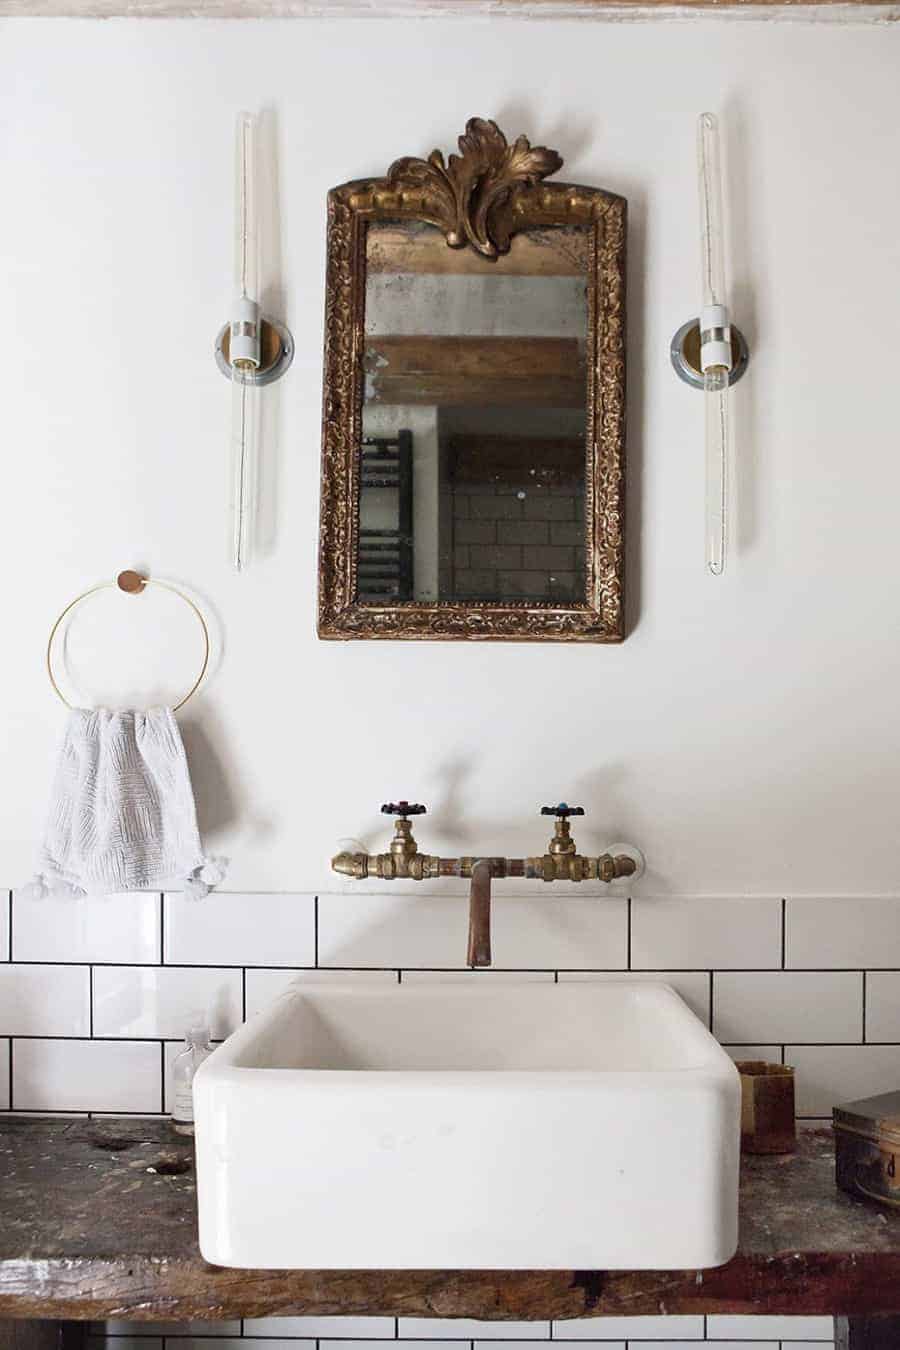 love this modern rustic bathroom by Joraima Tromp of Bricks Studio Amsterdam, with white square sink, old brass taps, vintage gilt mirror and rustic wood top with white metro tiles. Click through for more modern rustic country interiors you'll love